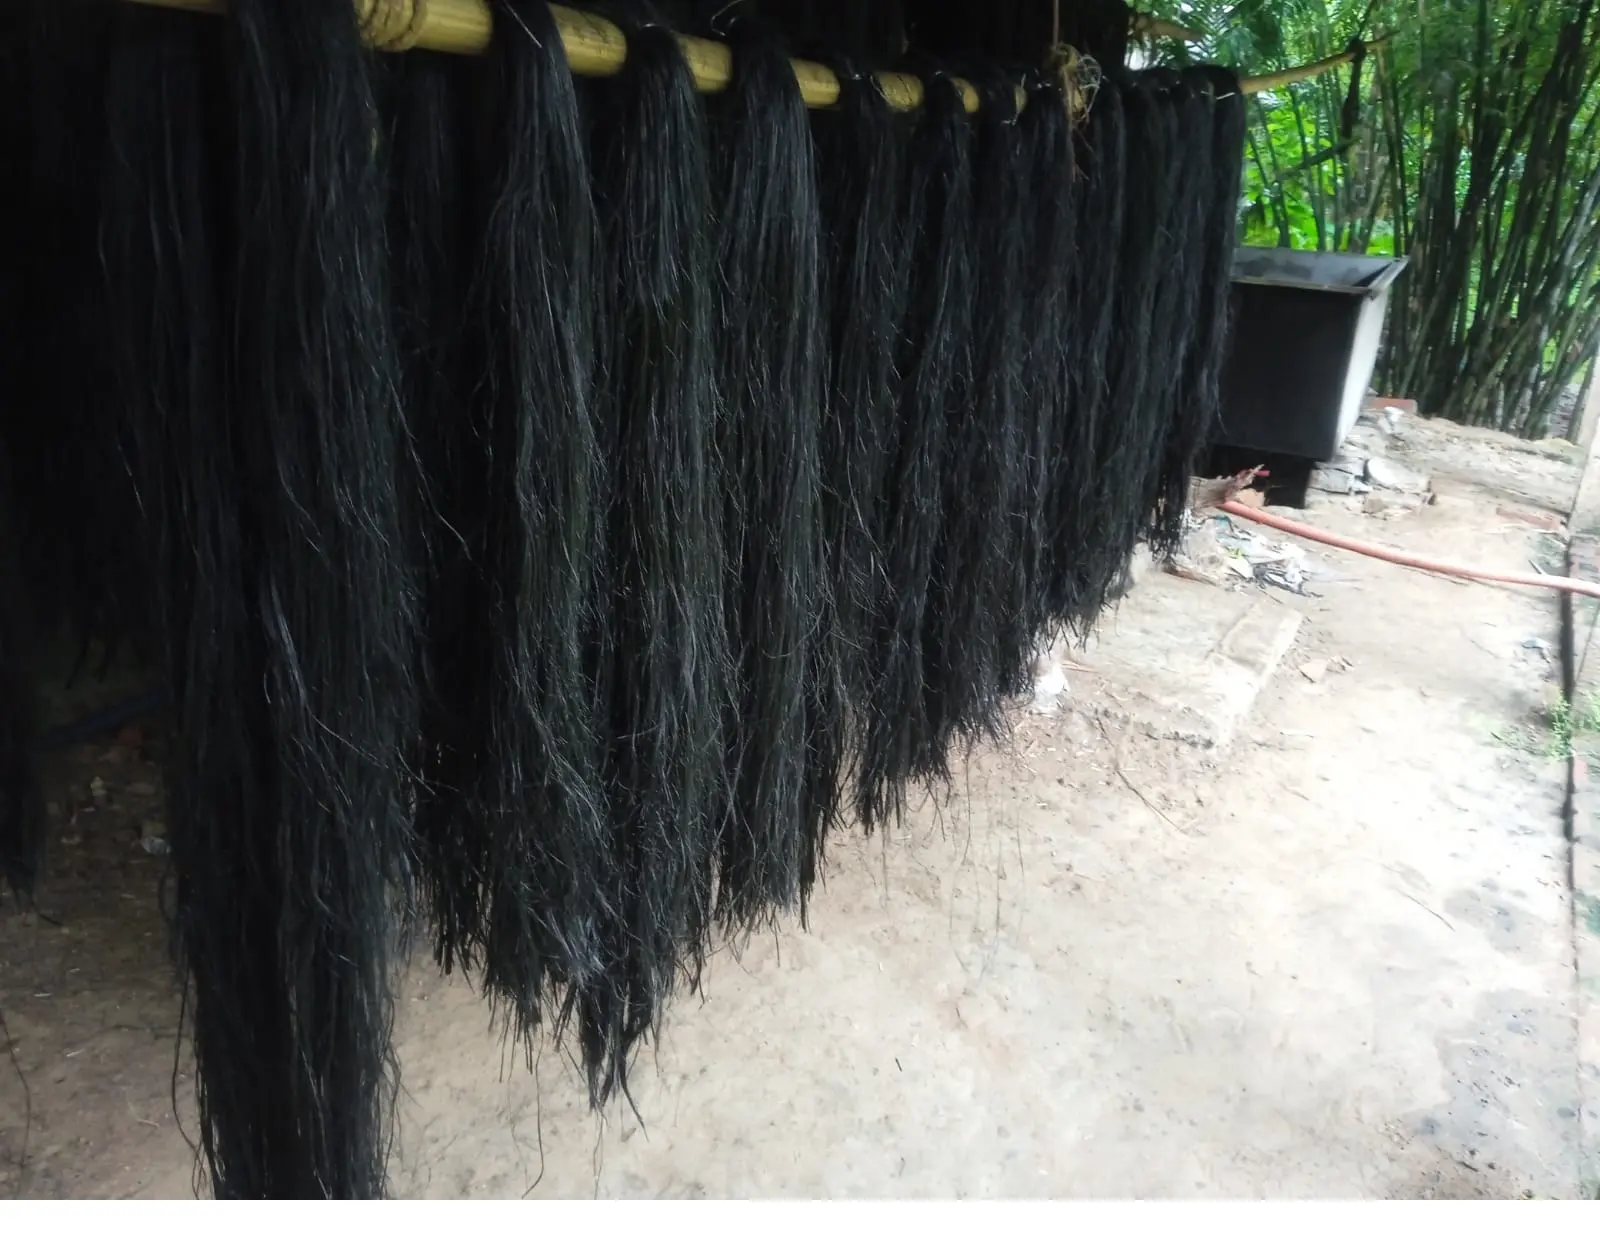 natural banana dyed black banana hair fiber in size 160 CM ideal for resale by hair extension designers